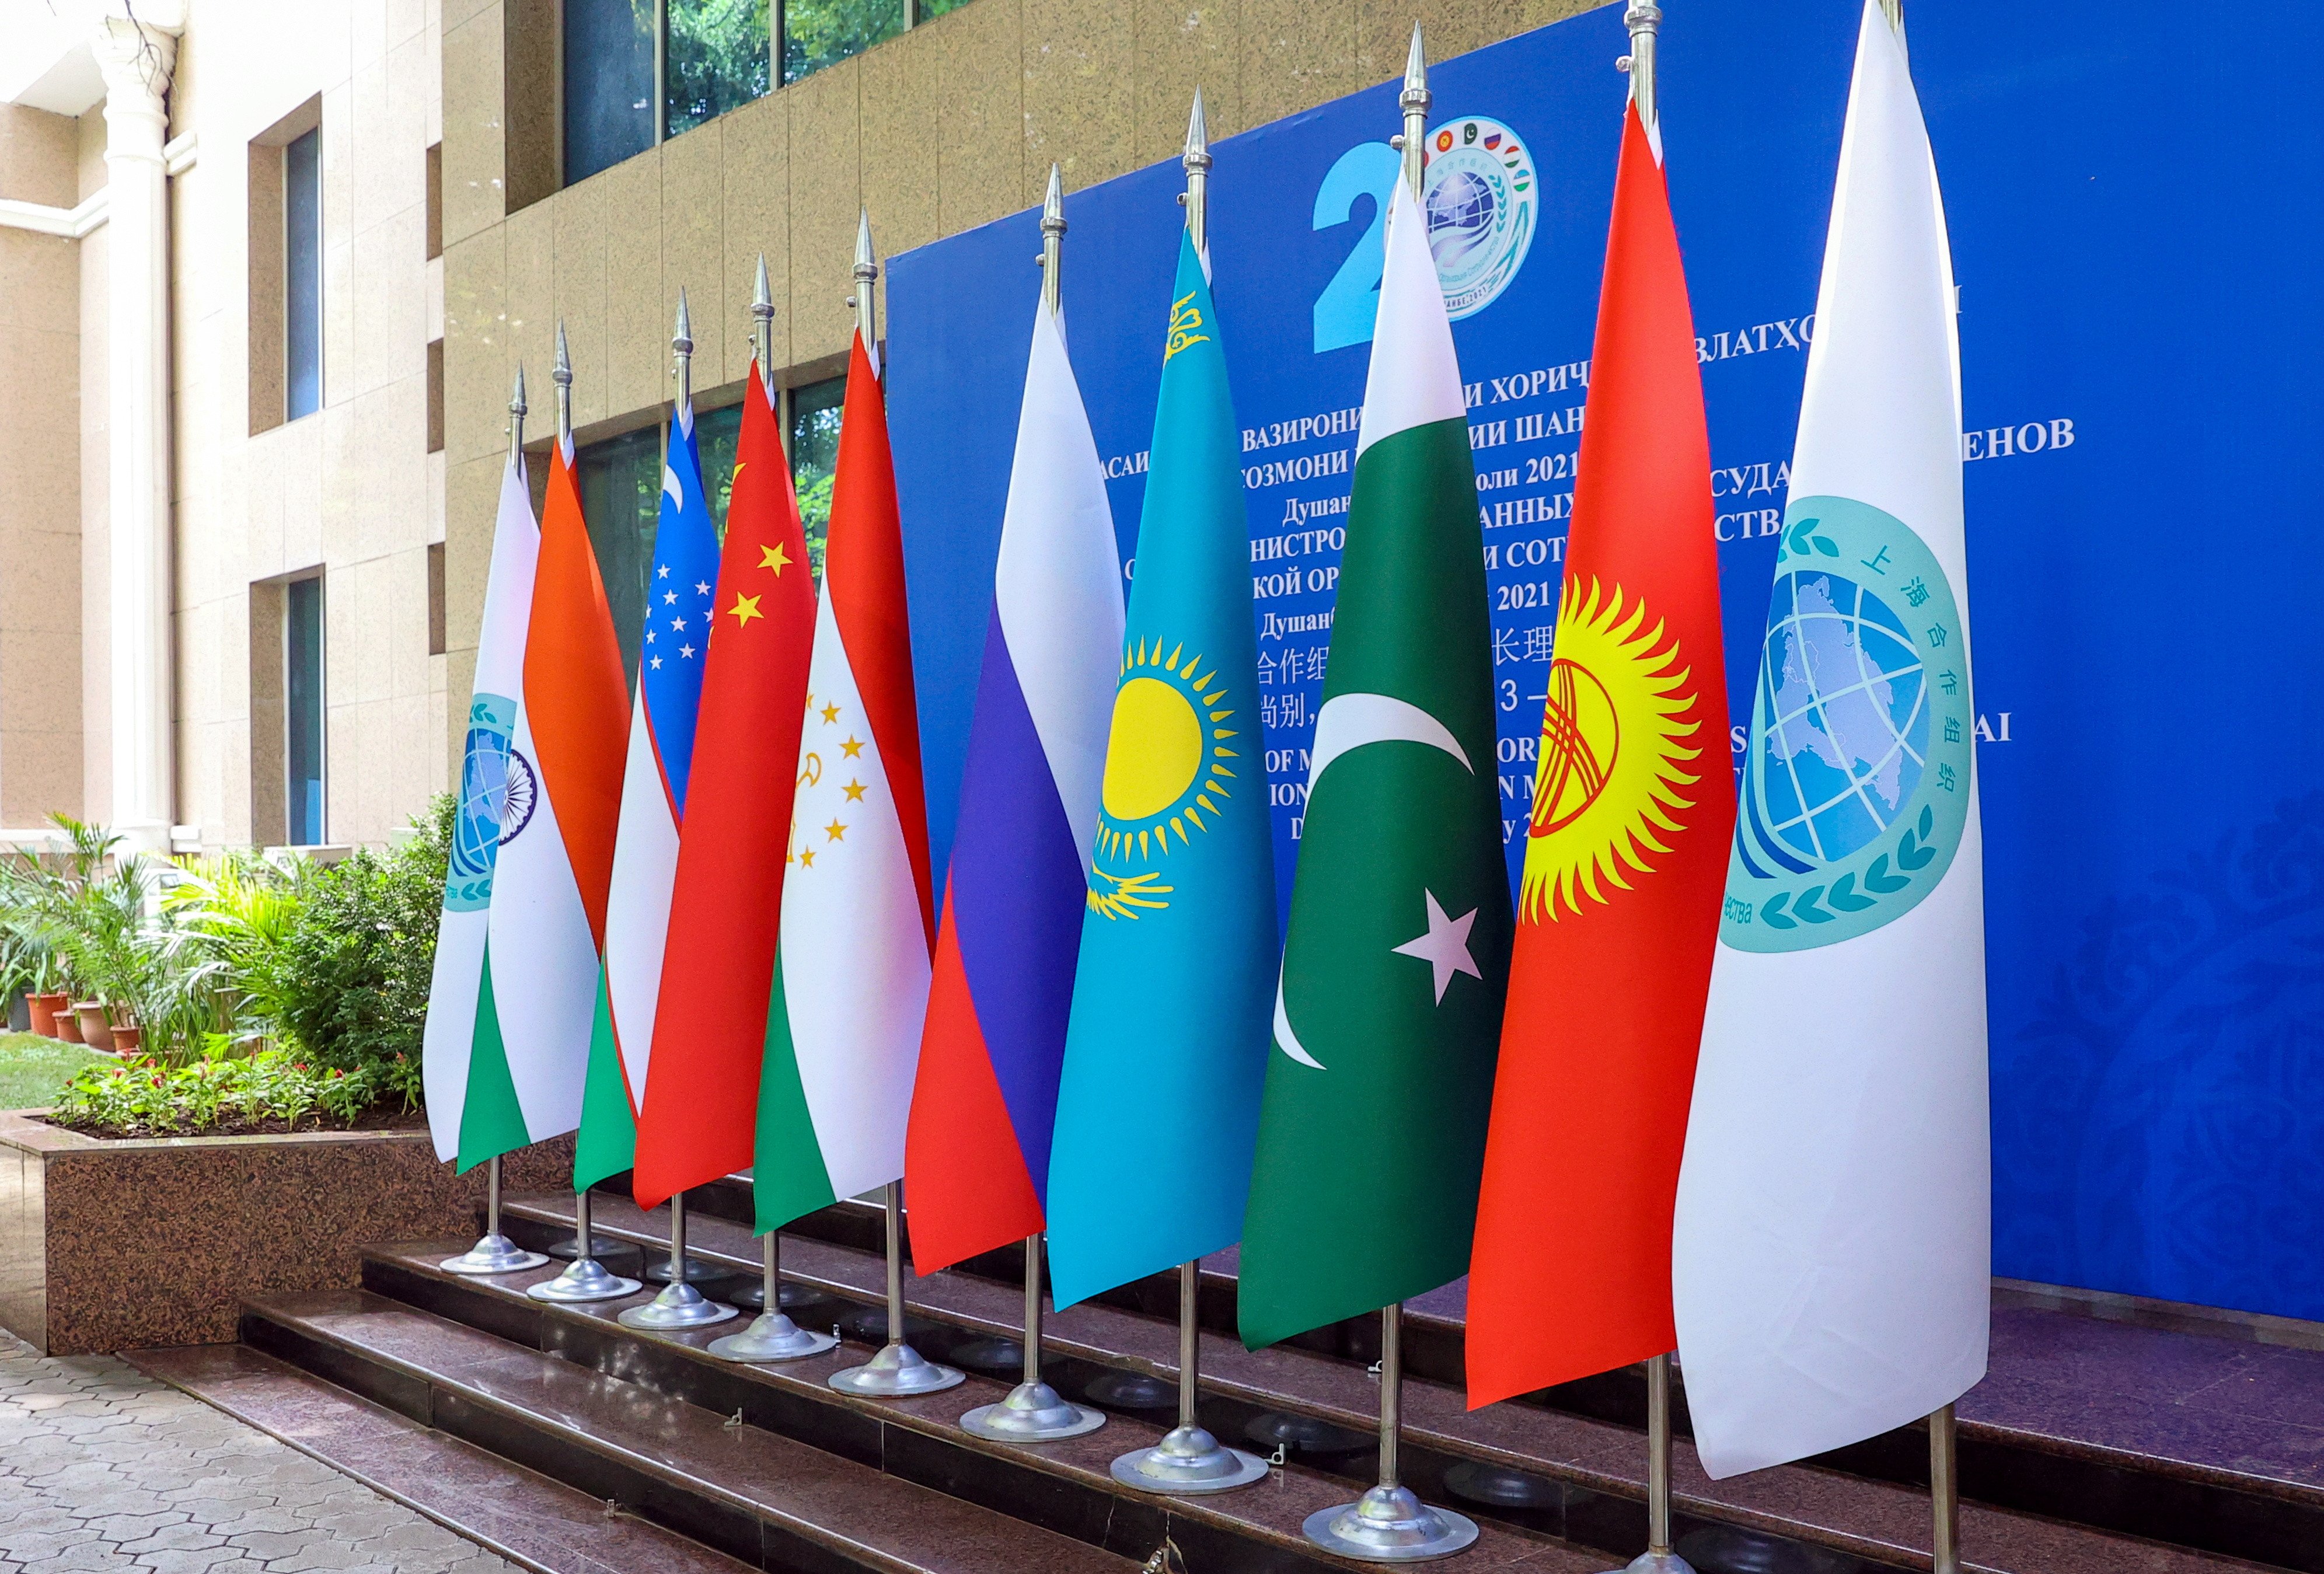 The national flags of the member states of the Shanghai Cooperation Organization, a Eurasian economic and security alliance, seen in Dushanbe, Tajikistan, on July 14. Photo: TASS via Getty Images